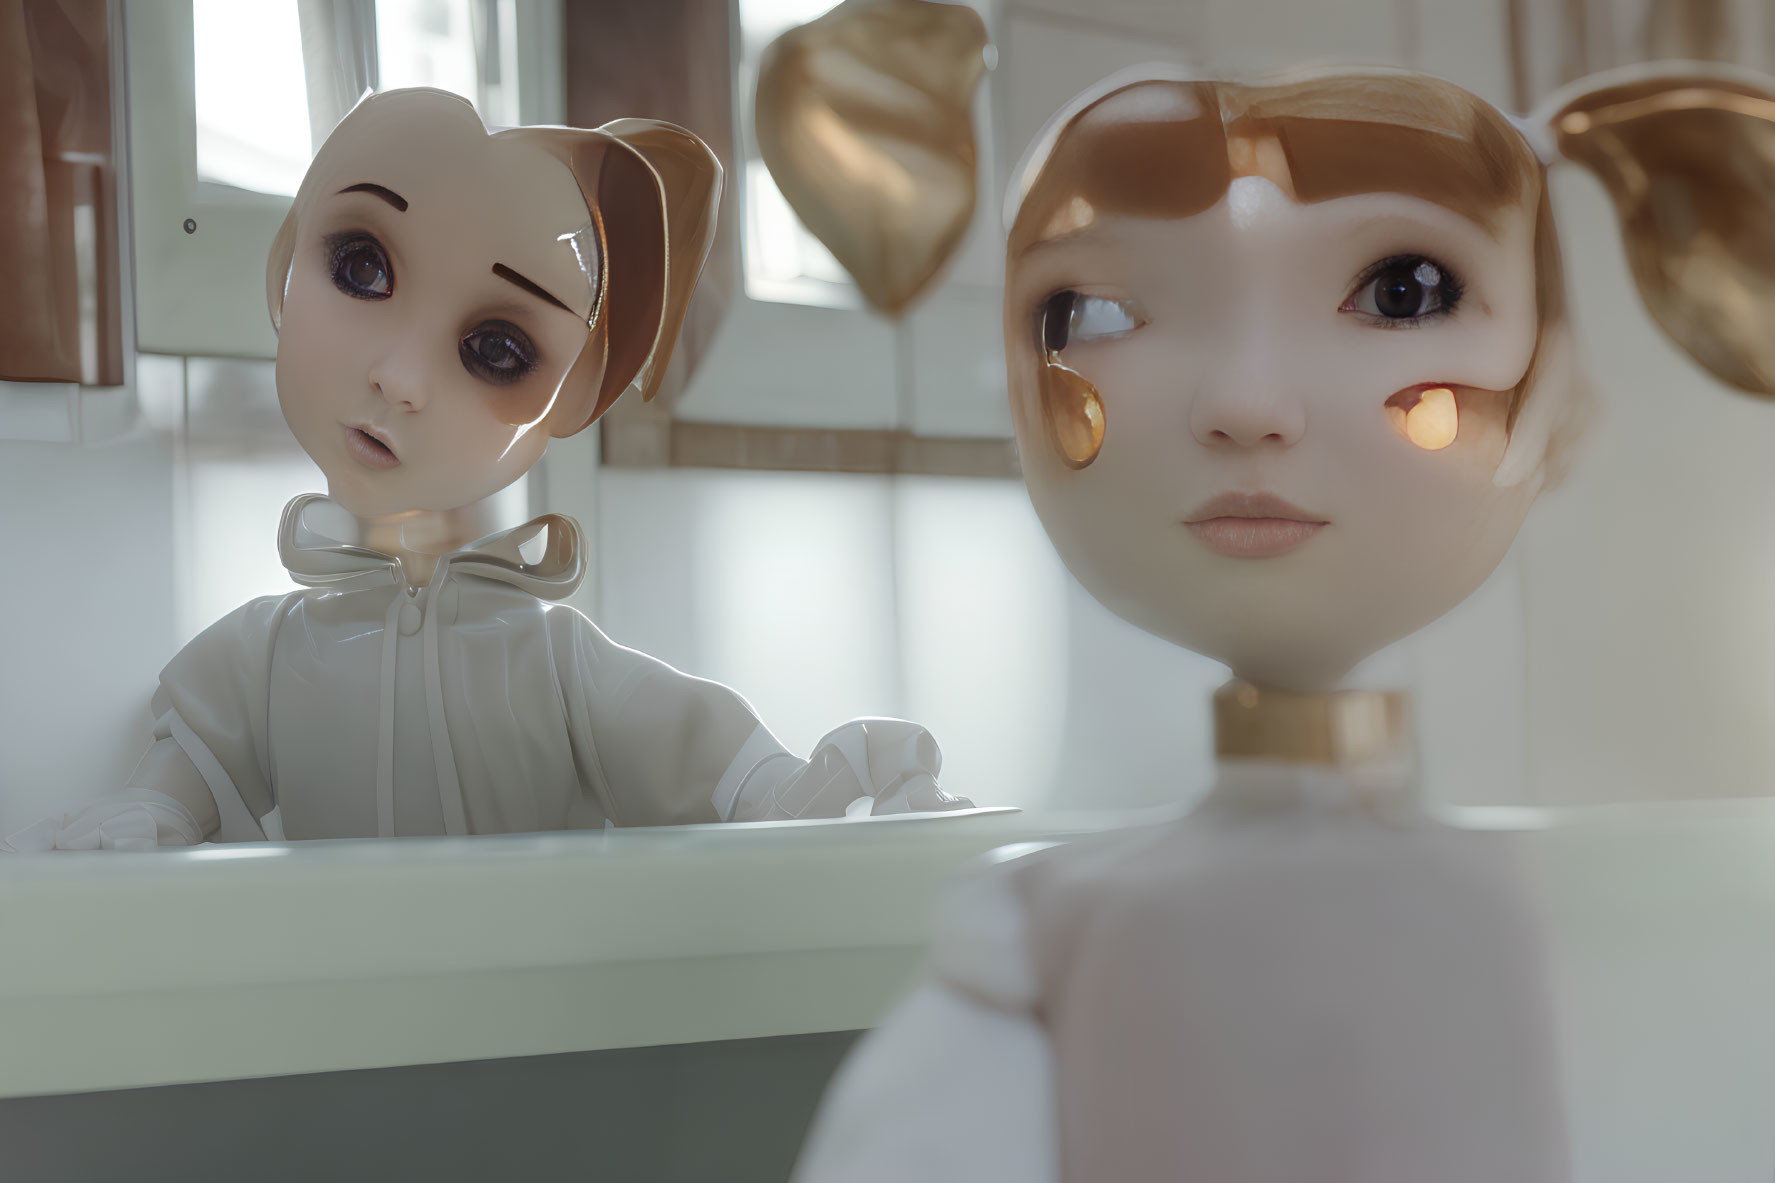 Porcelain dolls with hair bows in bright room counter